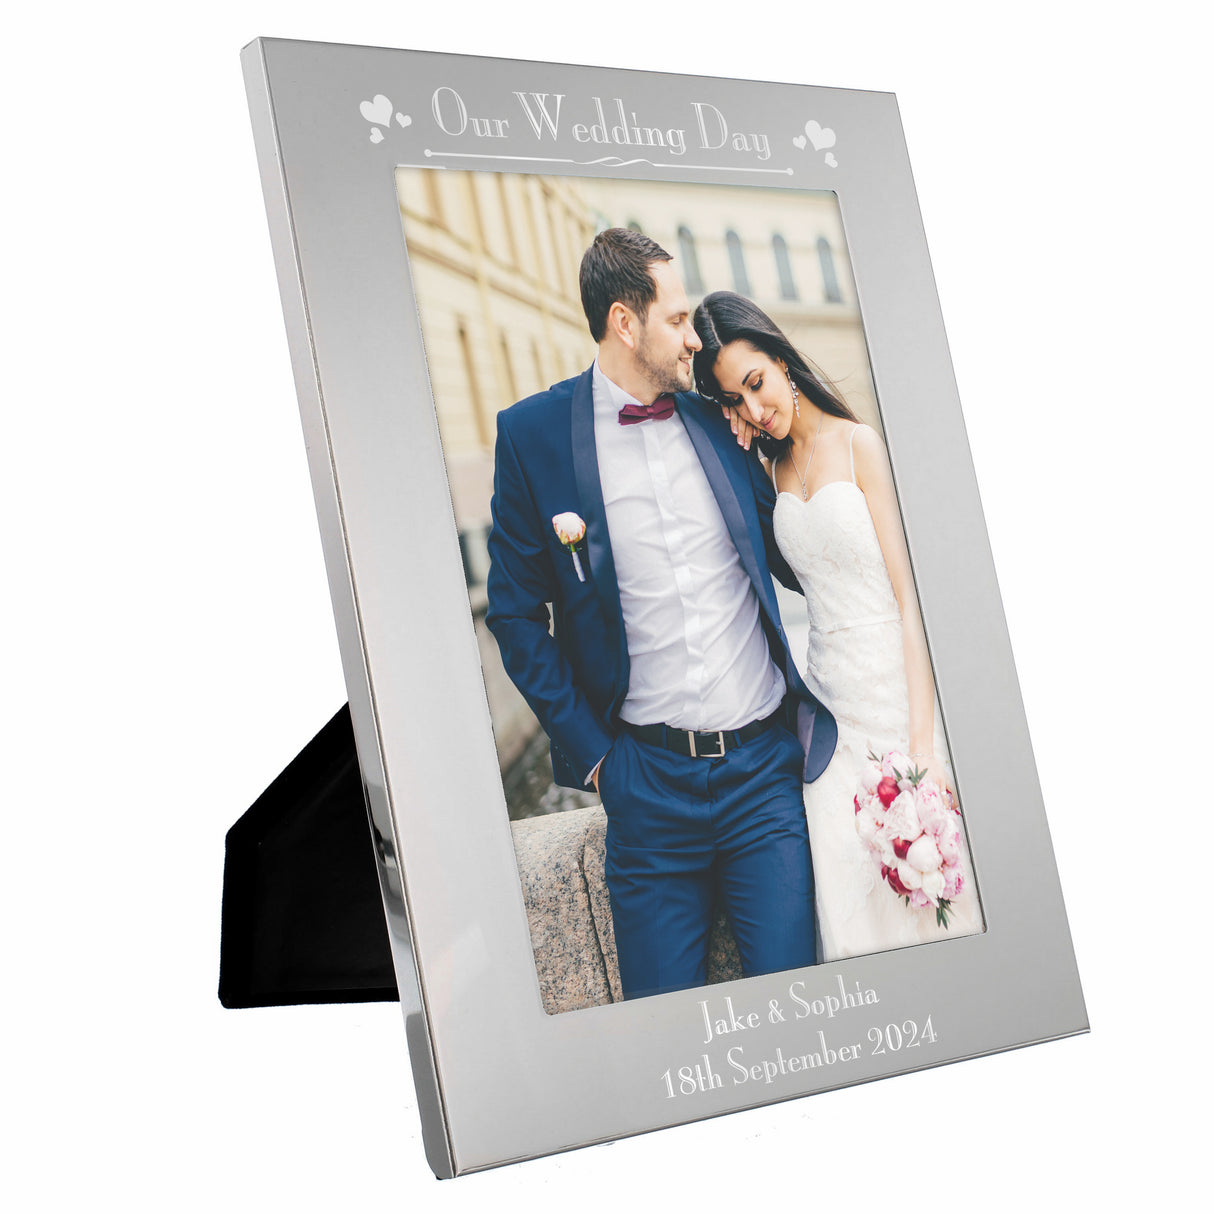 Personalised Silver 5x7 Decorative Our Wedding Day Photo Frame